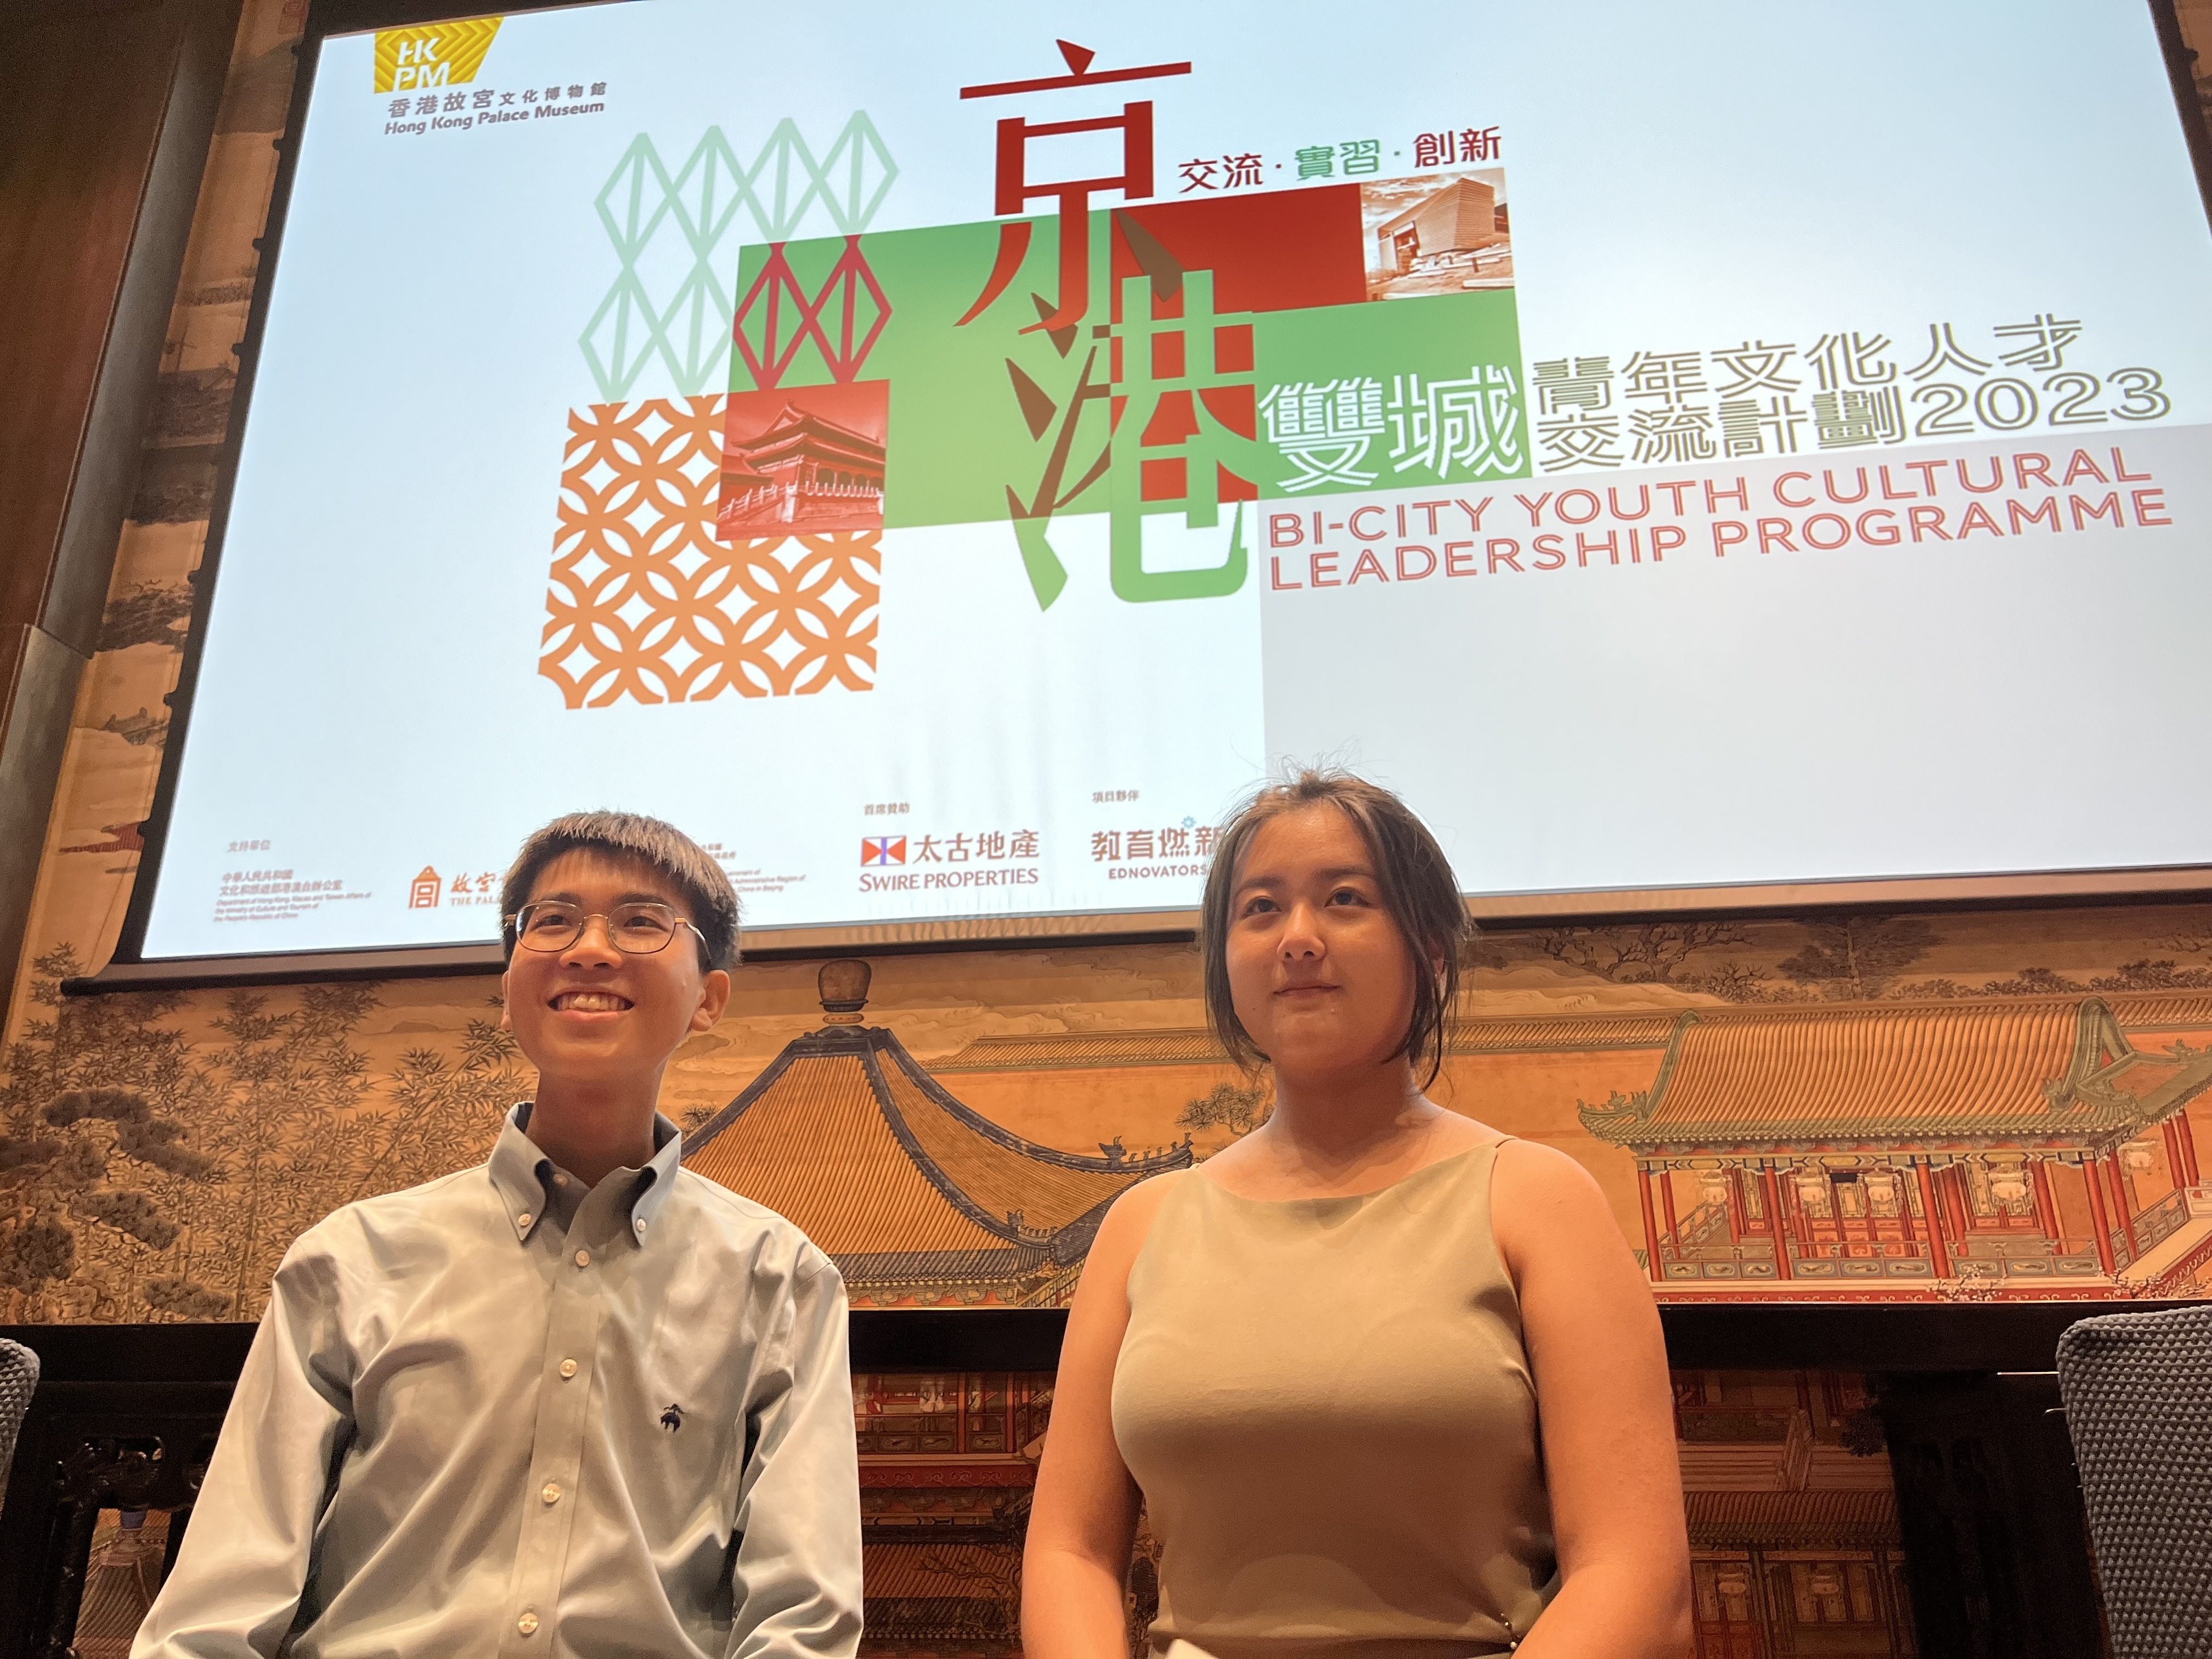 Ryan Lou (left) and Gui Xianxian are students from Beijing, who were part of the “Bi-city Youth Cultural Leadership Programme”. Photo: Kelly Fung